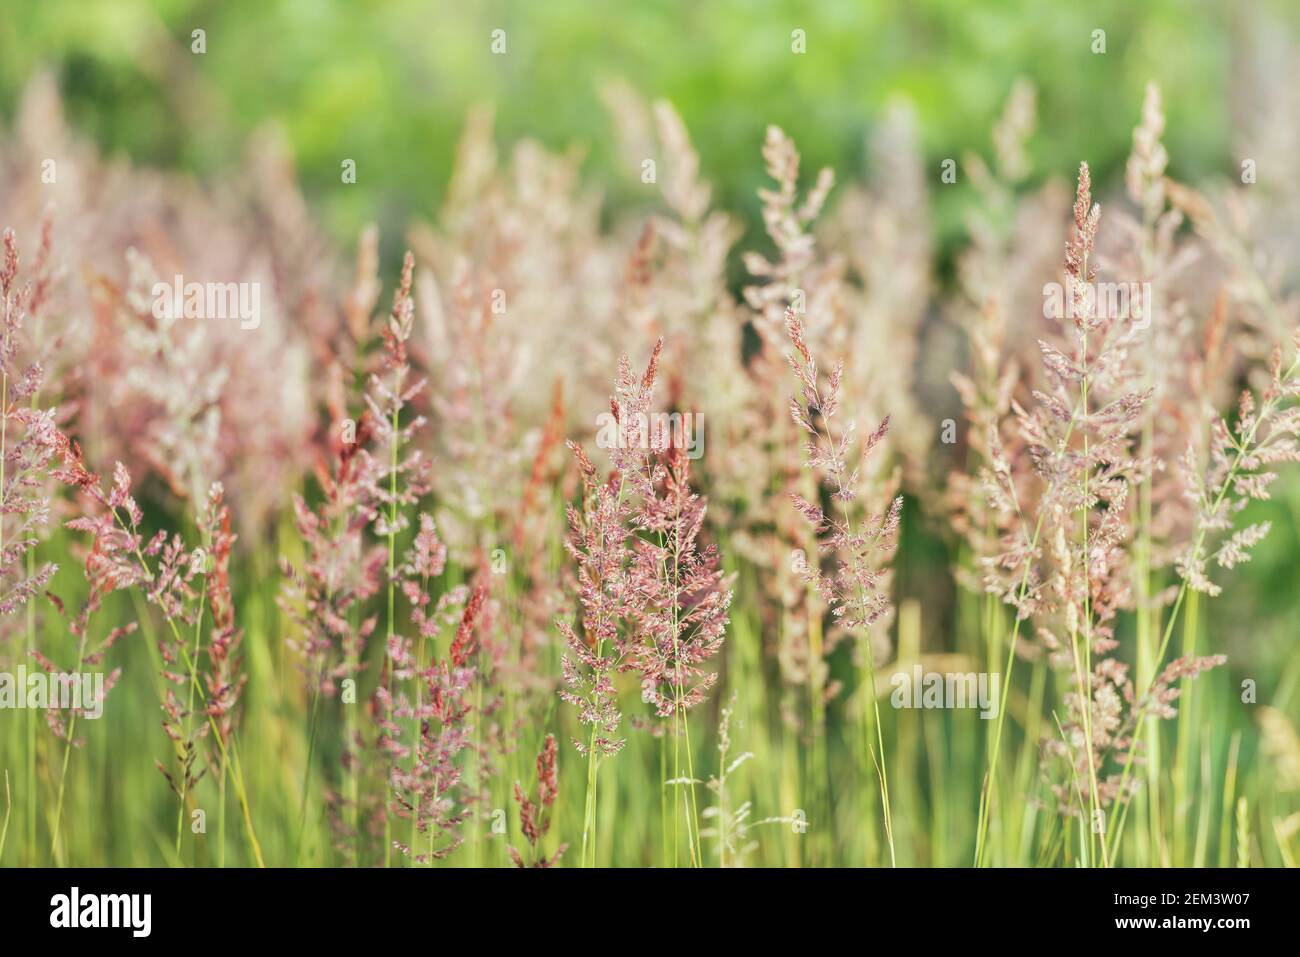 Fluffy spikelets grow at the edge of the field. Close-up of beautiful spikelet grass. Selective focus image. Stock Photo